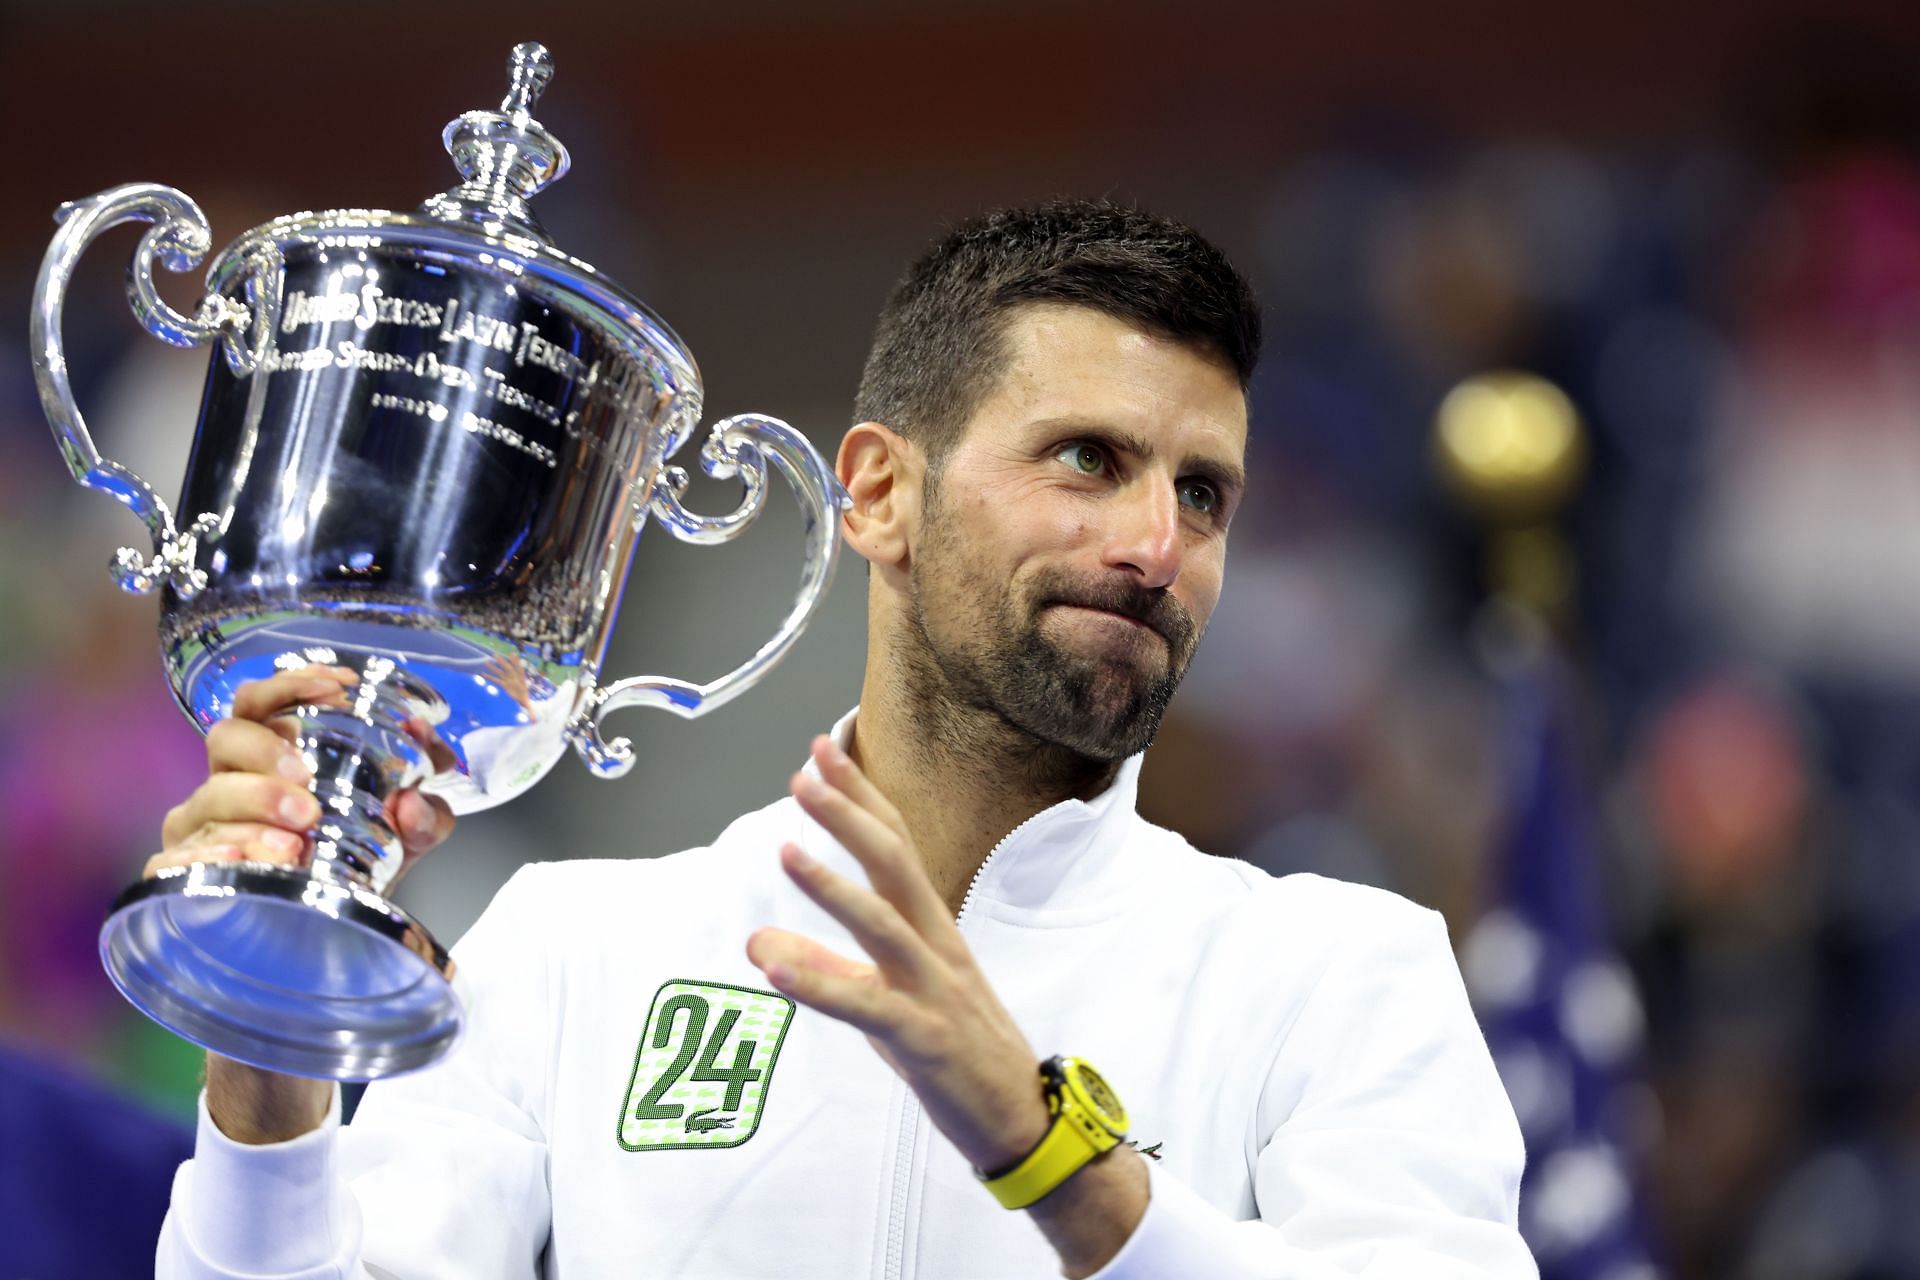 Novak Djokovic pictured with the 2023 US Open trophy